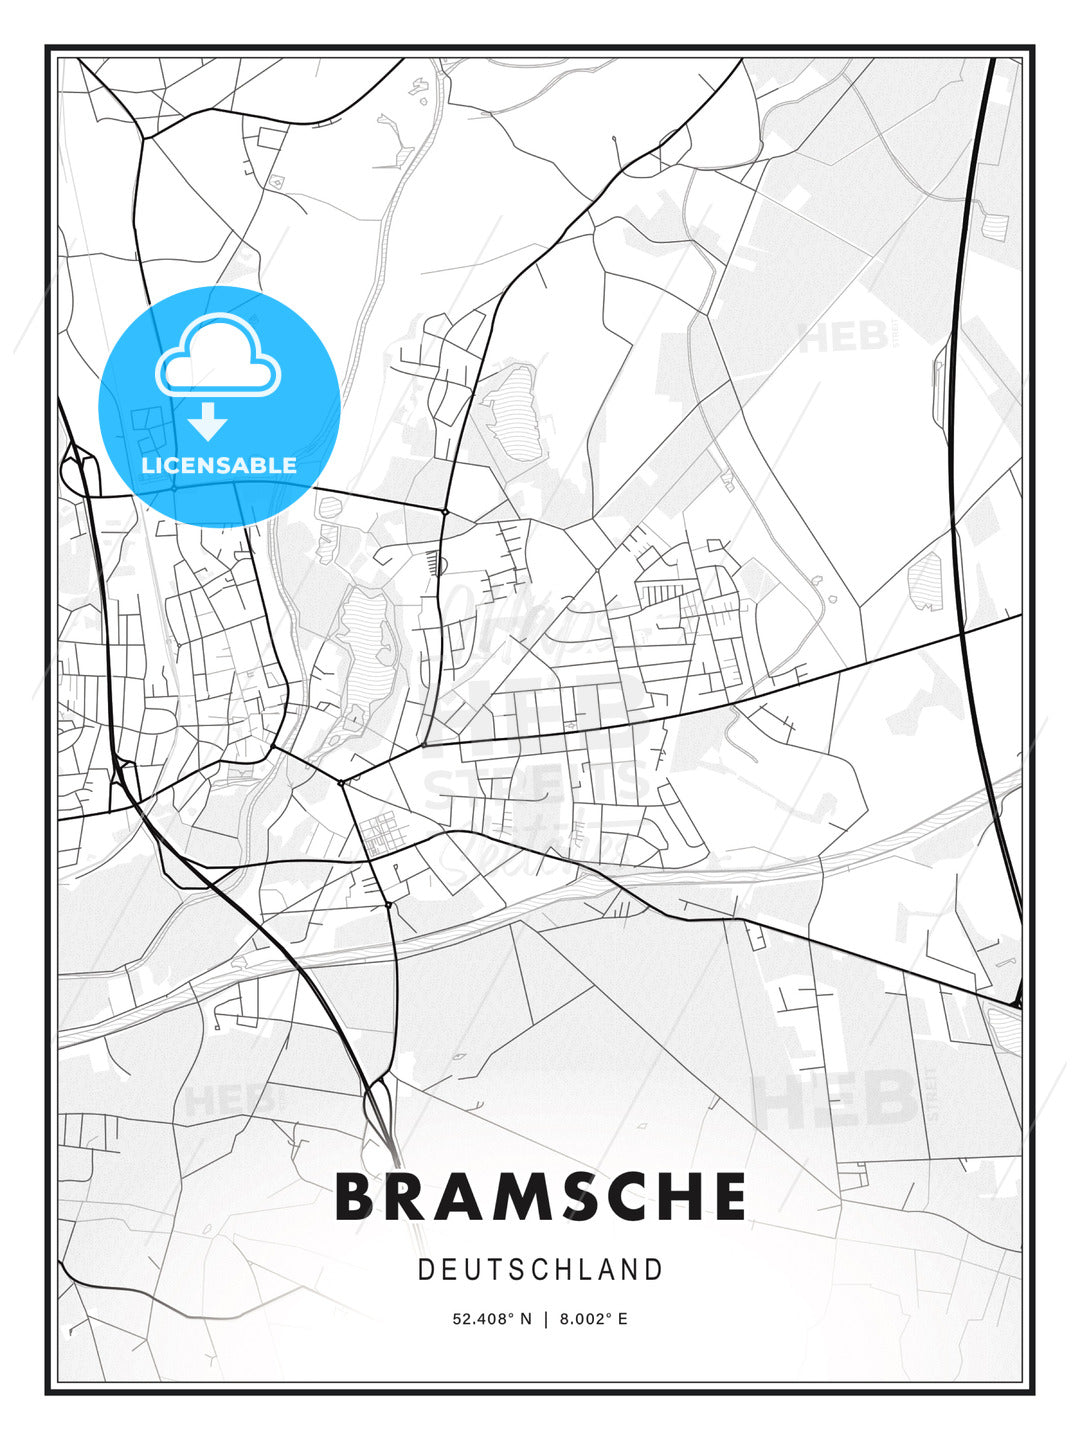 Bramsche, Germany, Modern Print Template in Various Formats - HEBSTREITS Sketches